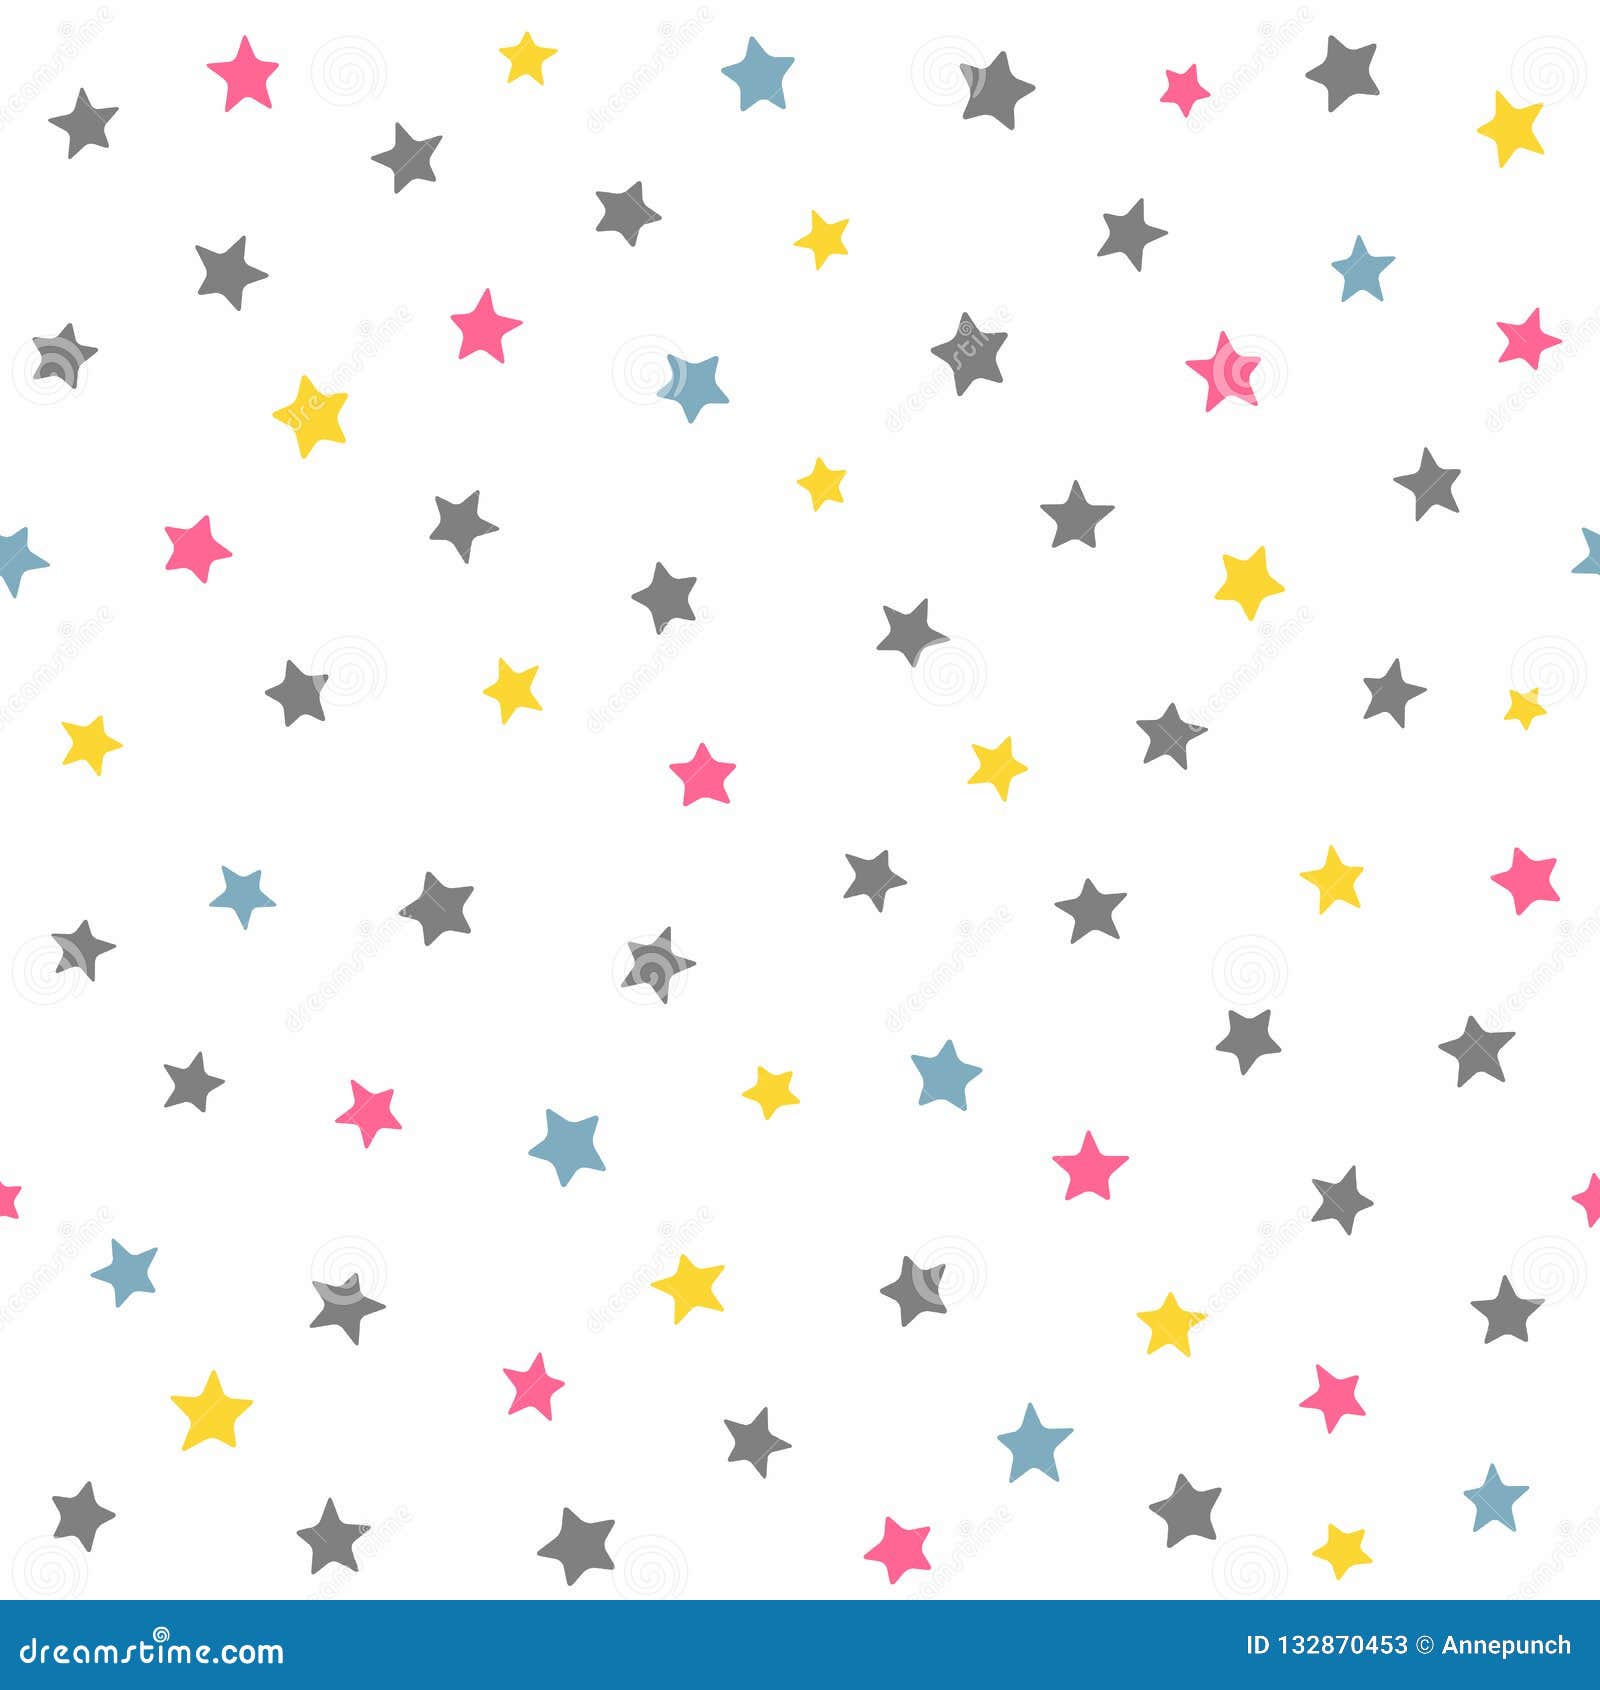 repeated coloured stars. cute seamless pattern for kids.